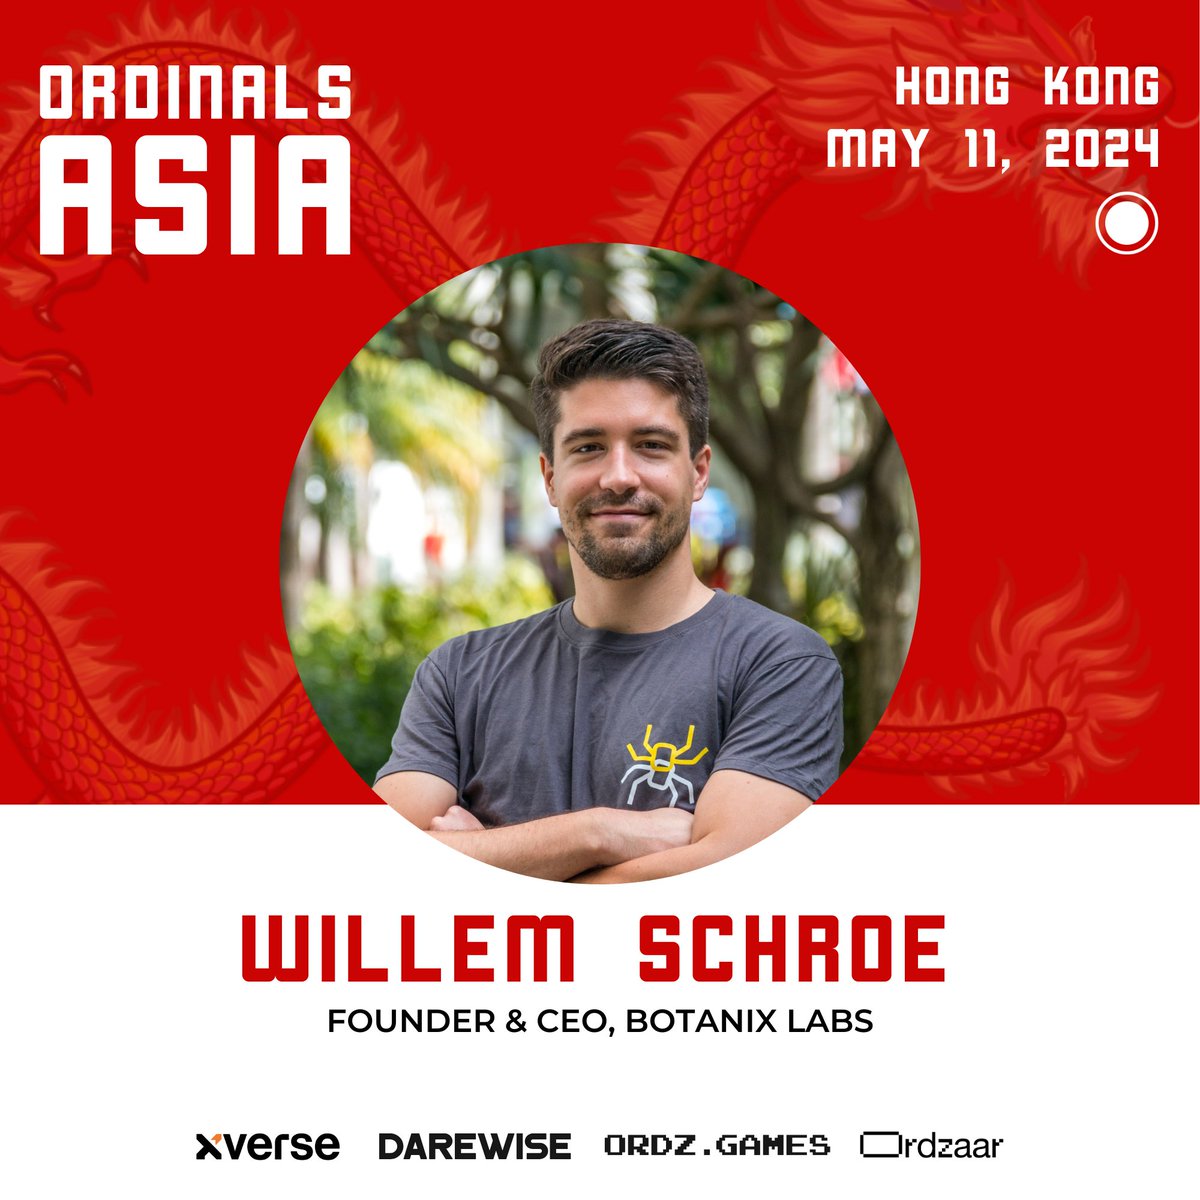 🐲SPEAKER ANNOUNCEMENT🐲 @WillemSchroe will be speaking at @Ordinals_Asia in Hong Kong! Willem, the Co-founder and CEO of @BotanixLabs, is building a fully decentralized EVM ecosystem on Bitcoin, powered by the Spiderchain. 🕷️ 🎟️Get your ticket today: lu.ma/OrdinalsAsia